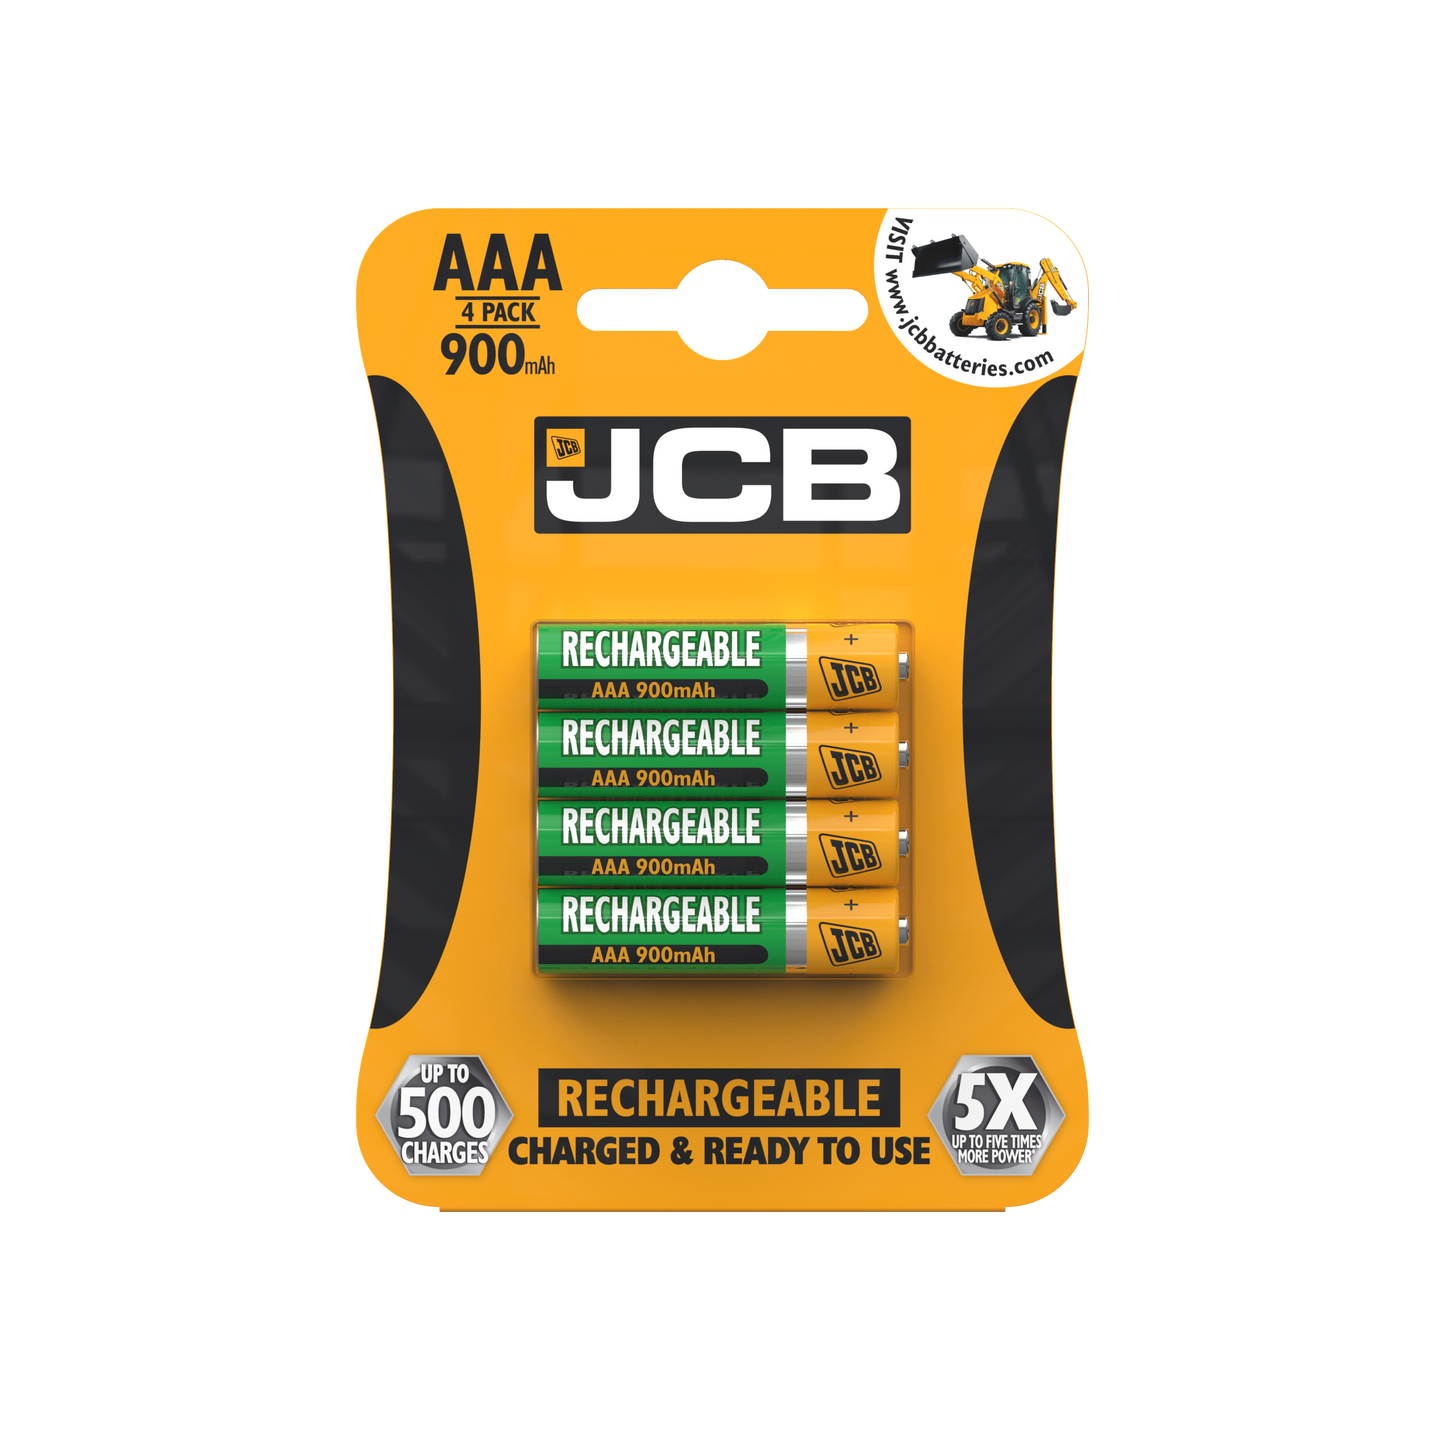 JCB AAA 900mAh Rechargeable, Pack of 4